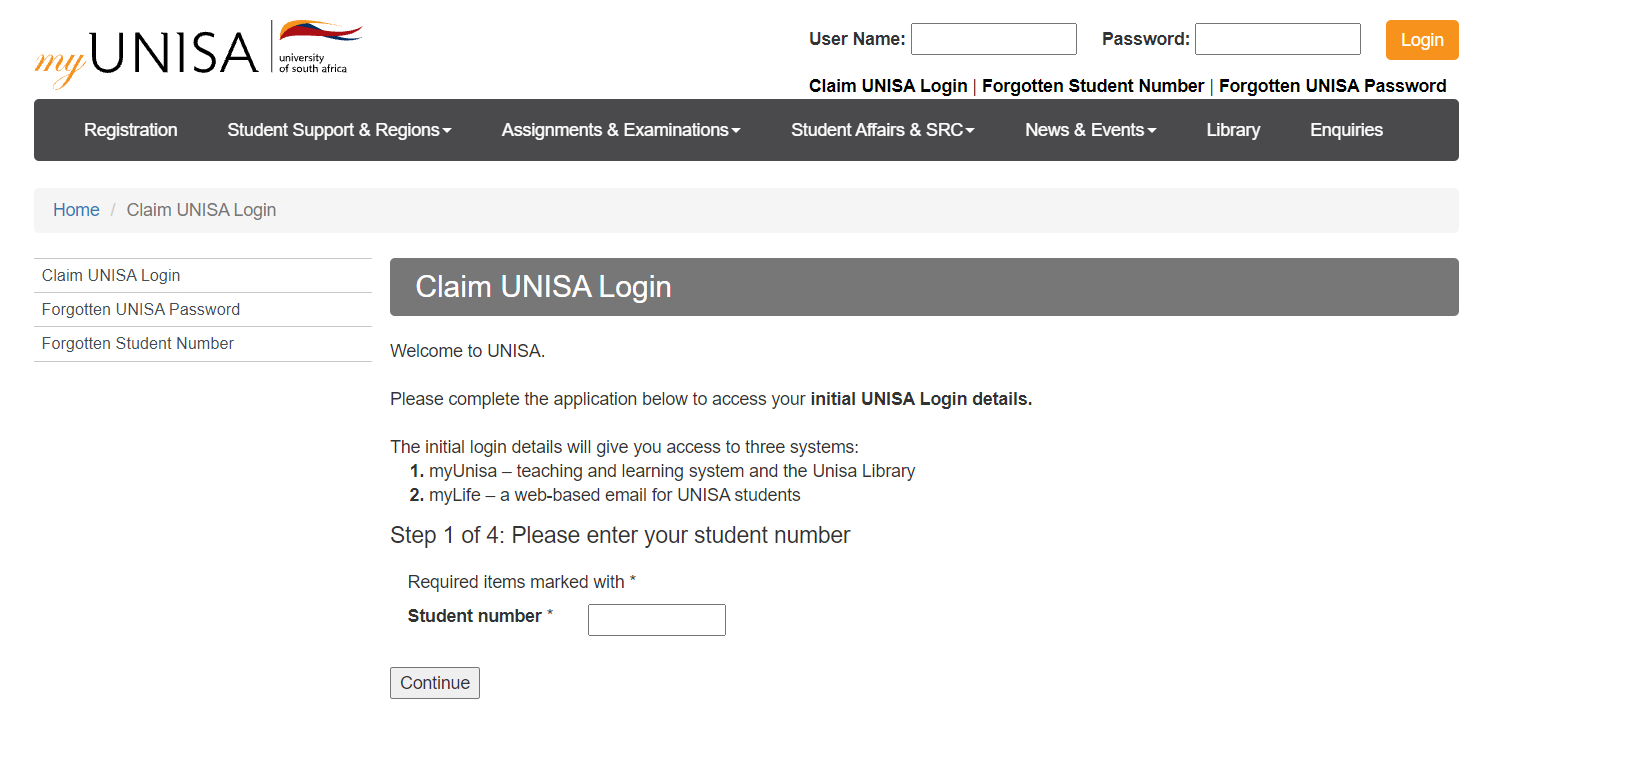 How to Access myUnisa Login & myLife Email account